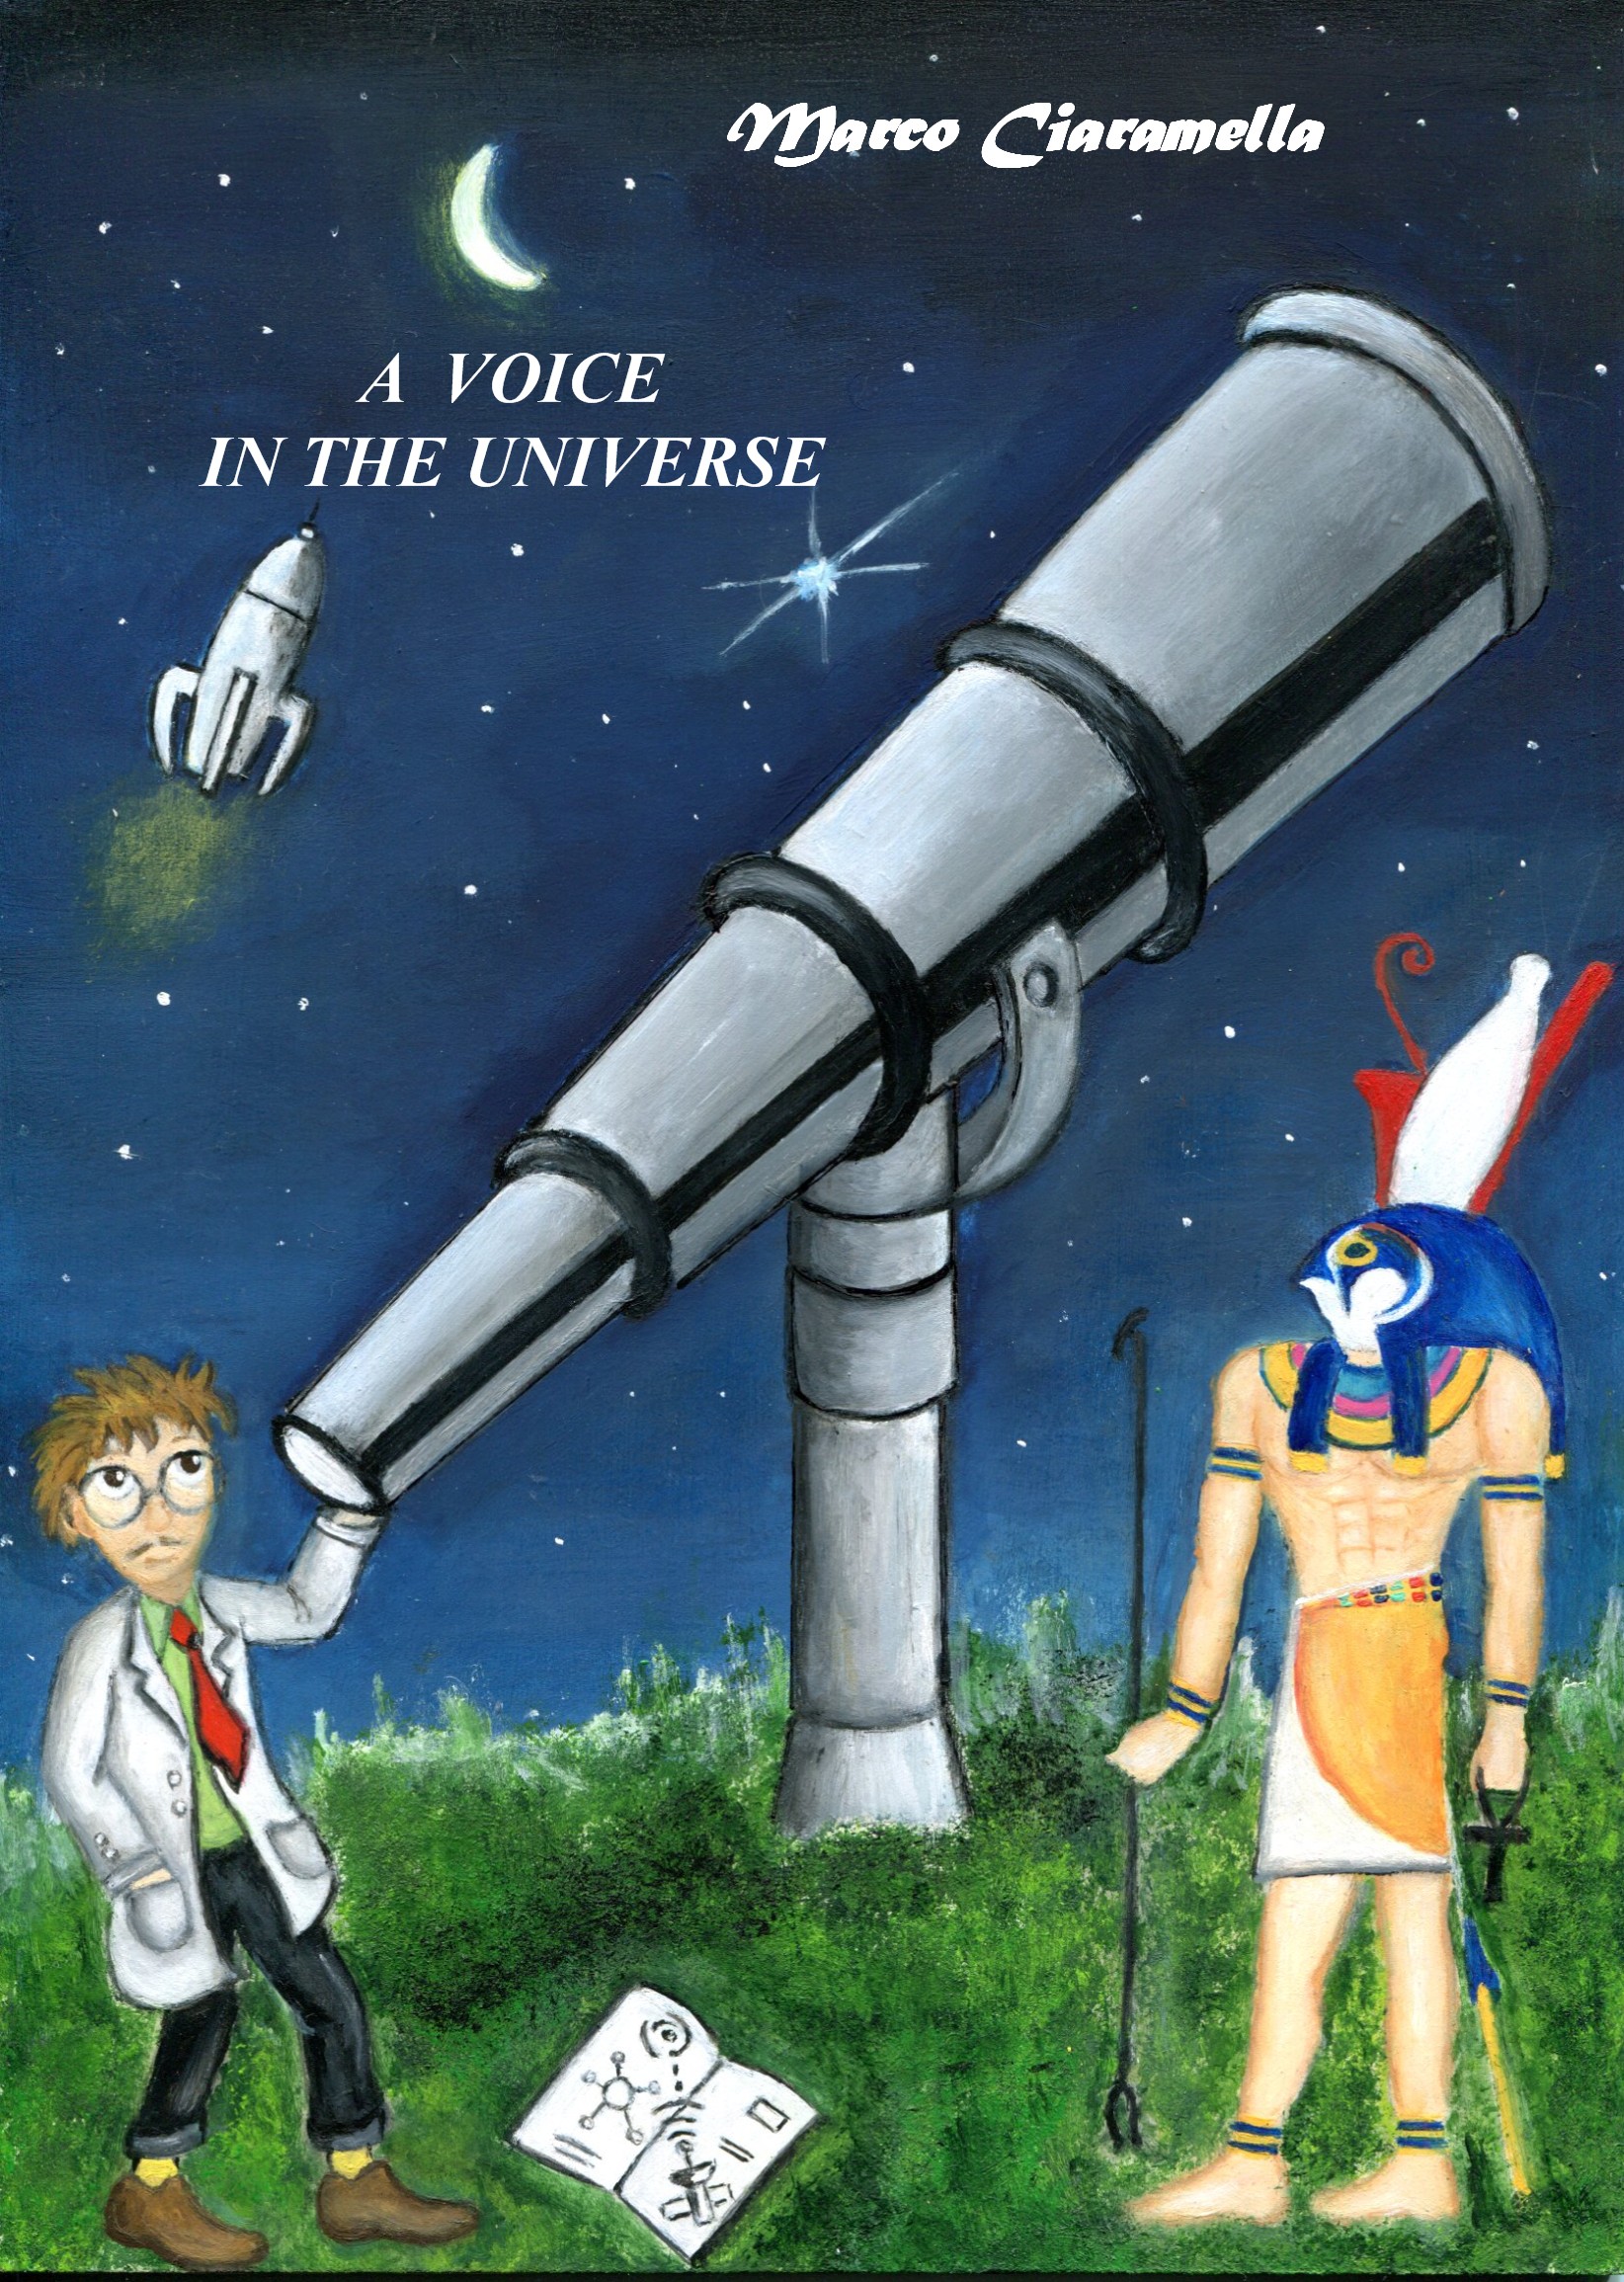 A voice in the universe